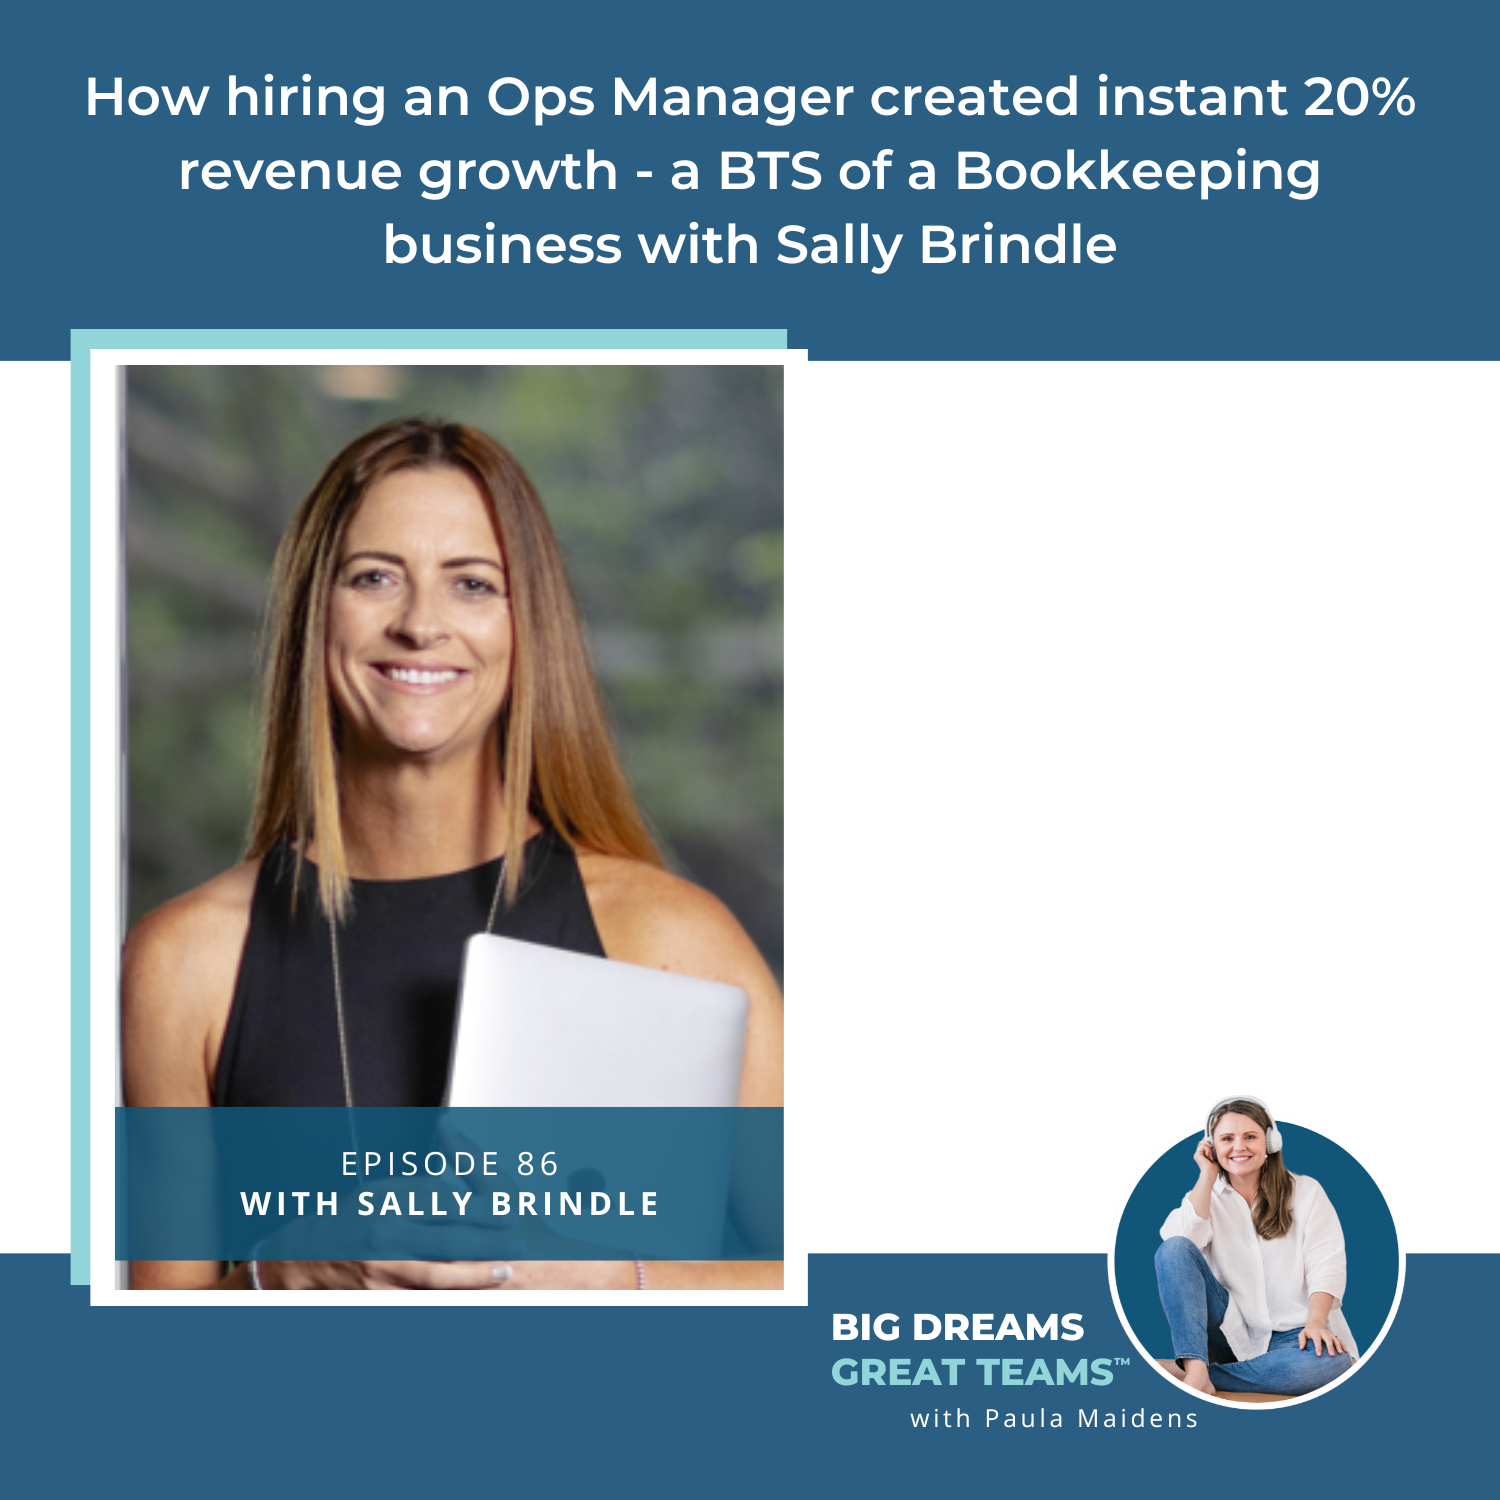 How hiring an Ops Manager created instant 20% revenue growth - a BTS of a Bookkeeping business with Sally Brindle